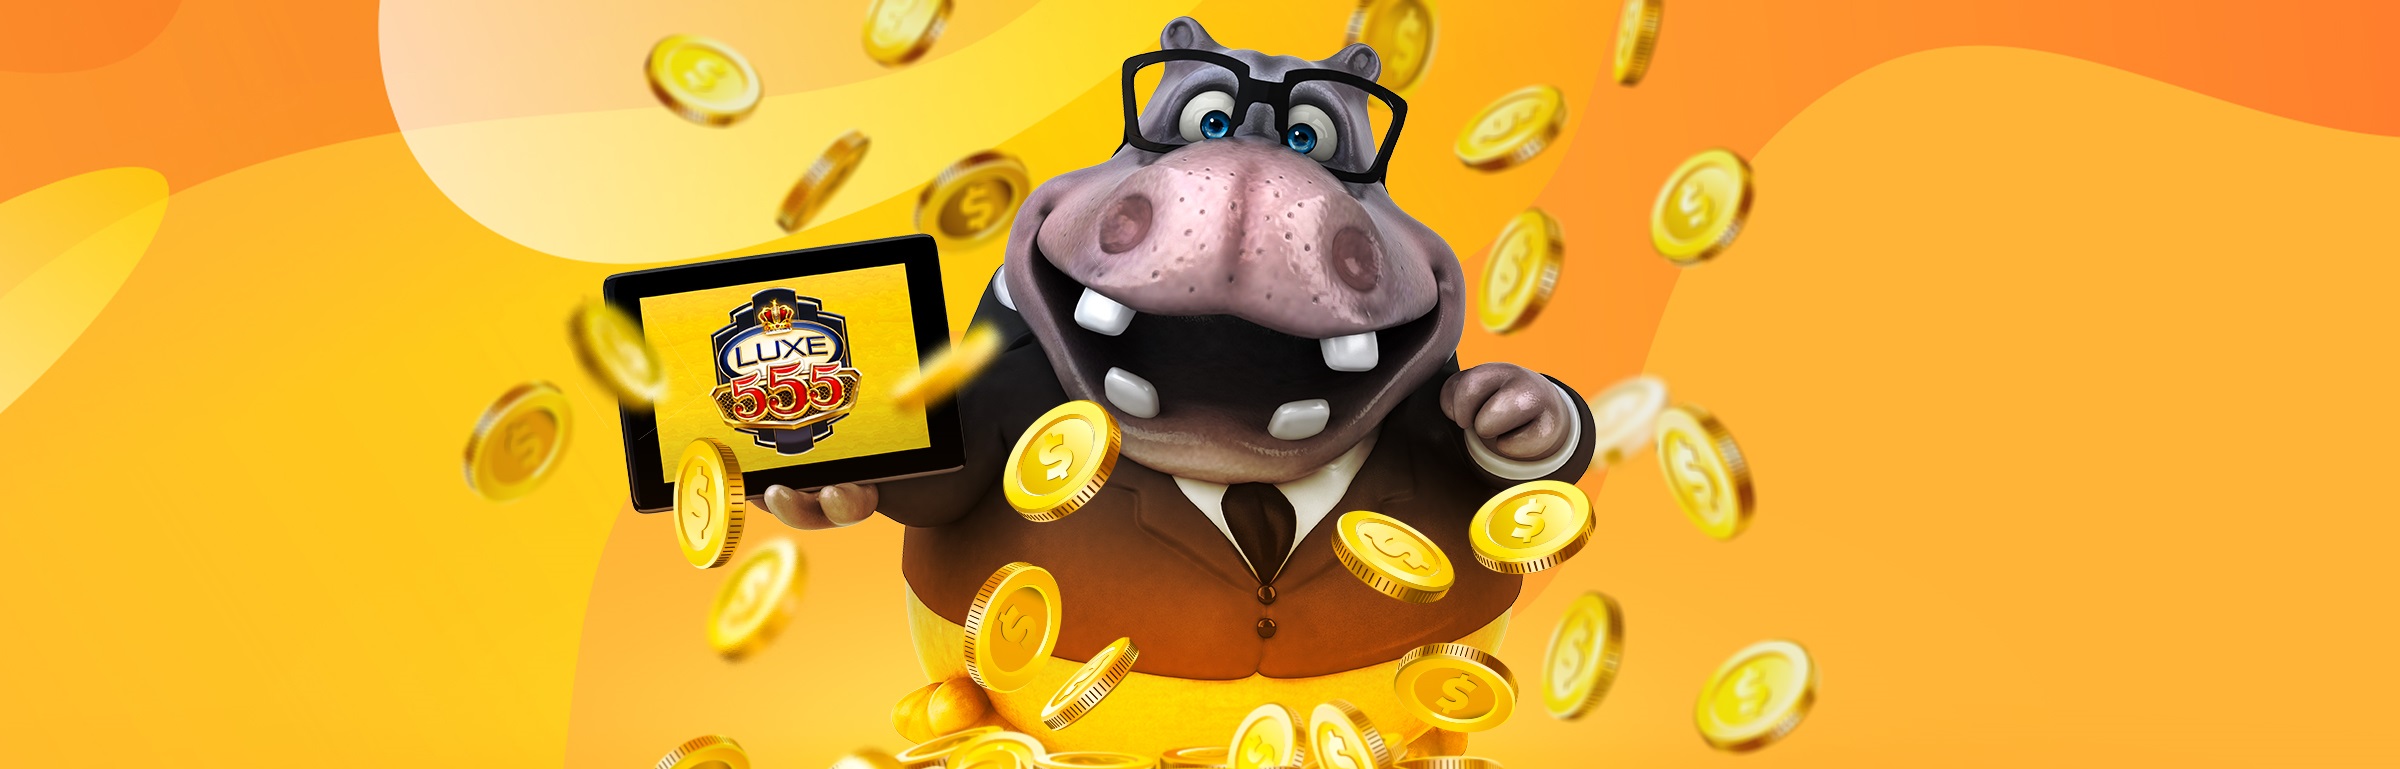 A 3D-animated hippopotamus wearing a suit and tie barrels towards the screen through a fog of gold coins. In his right hand, he holds up an iPad showing the logo for the SlotsLV slot game, Luxe 555.